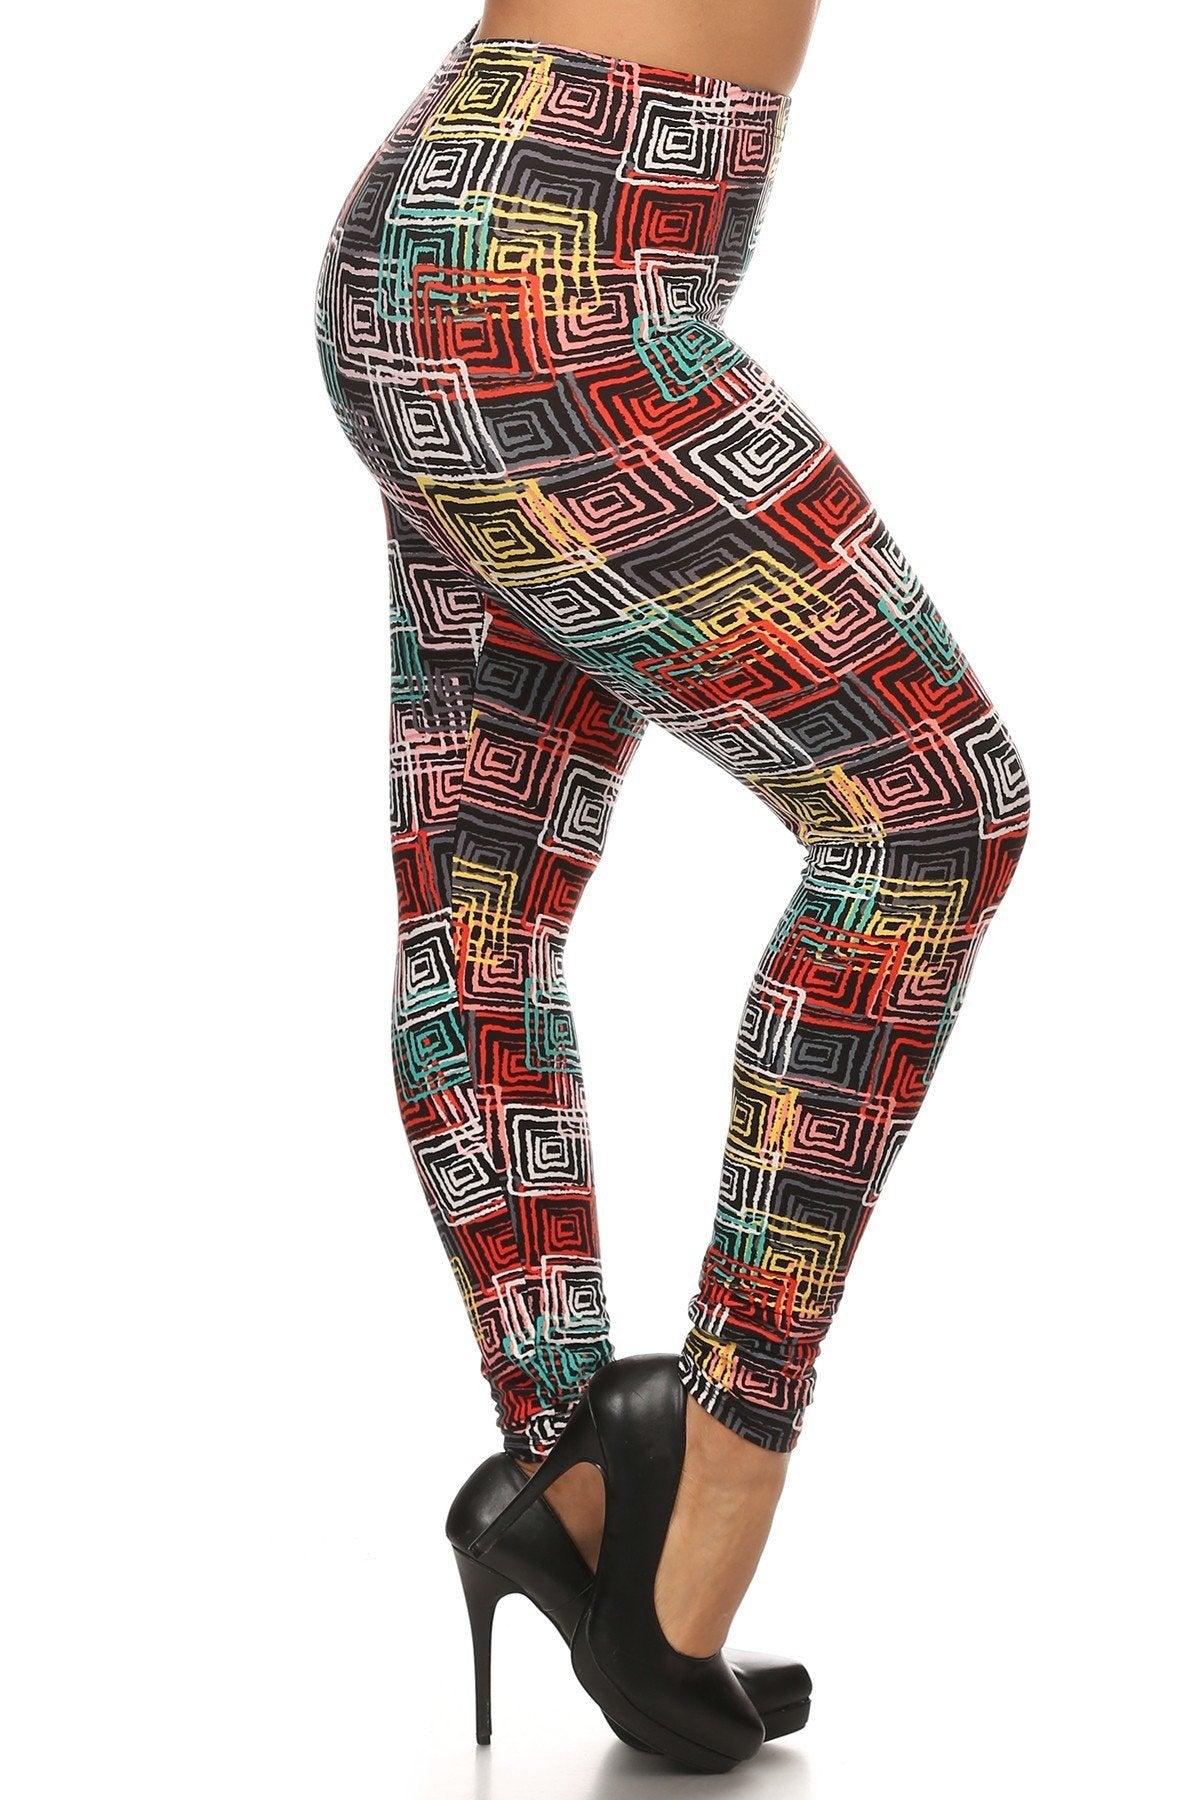 Abstract Geometric Printed Knit Legging With Elastic Waistband, And High Waist Fit